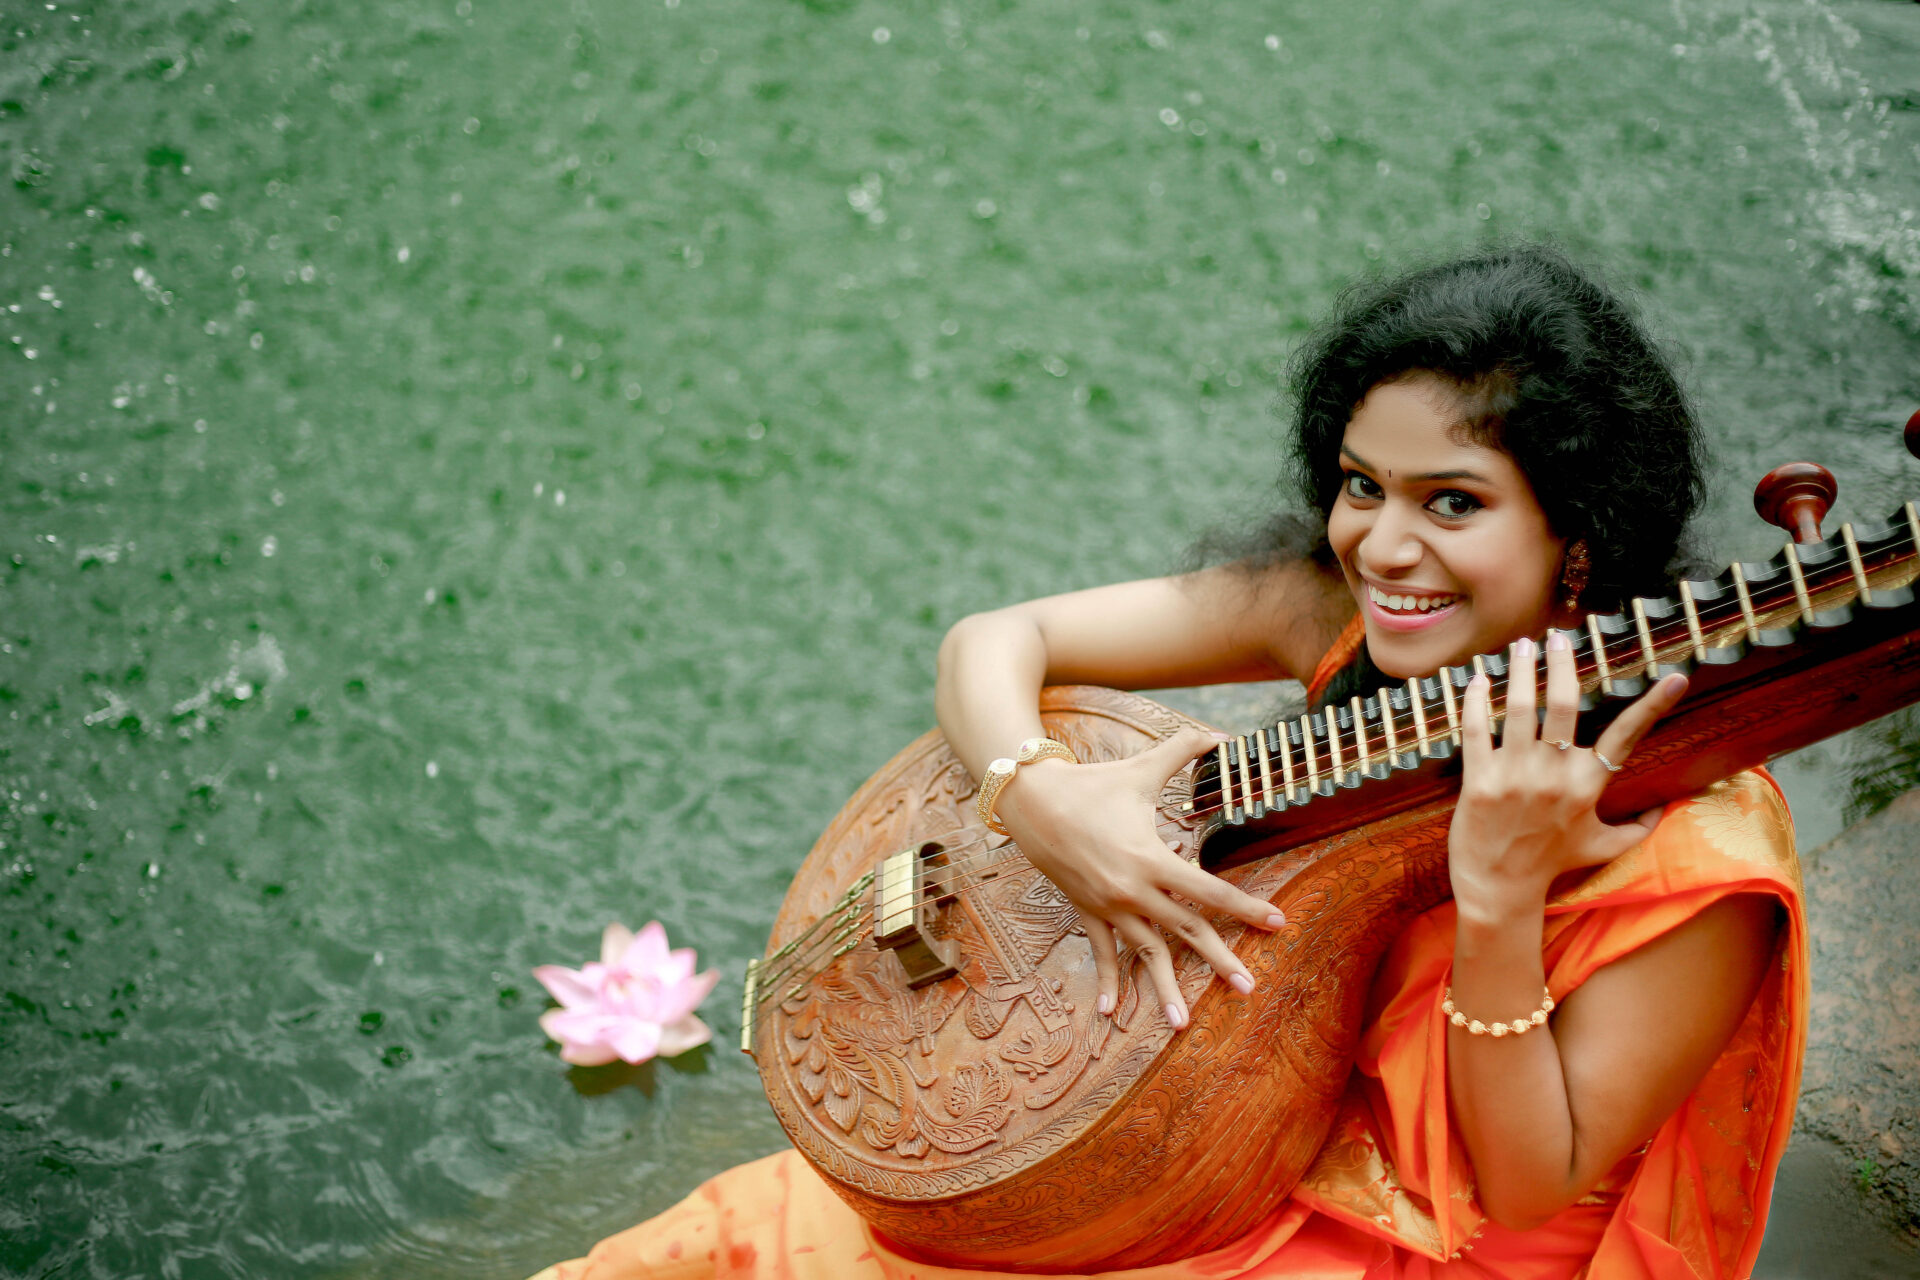 “The Music of Care” expedition cover image: Dr. Tara Rajendran with a Saraswati veena.